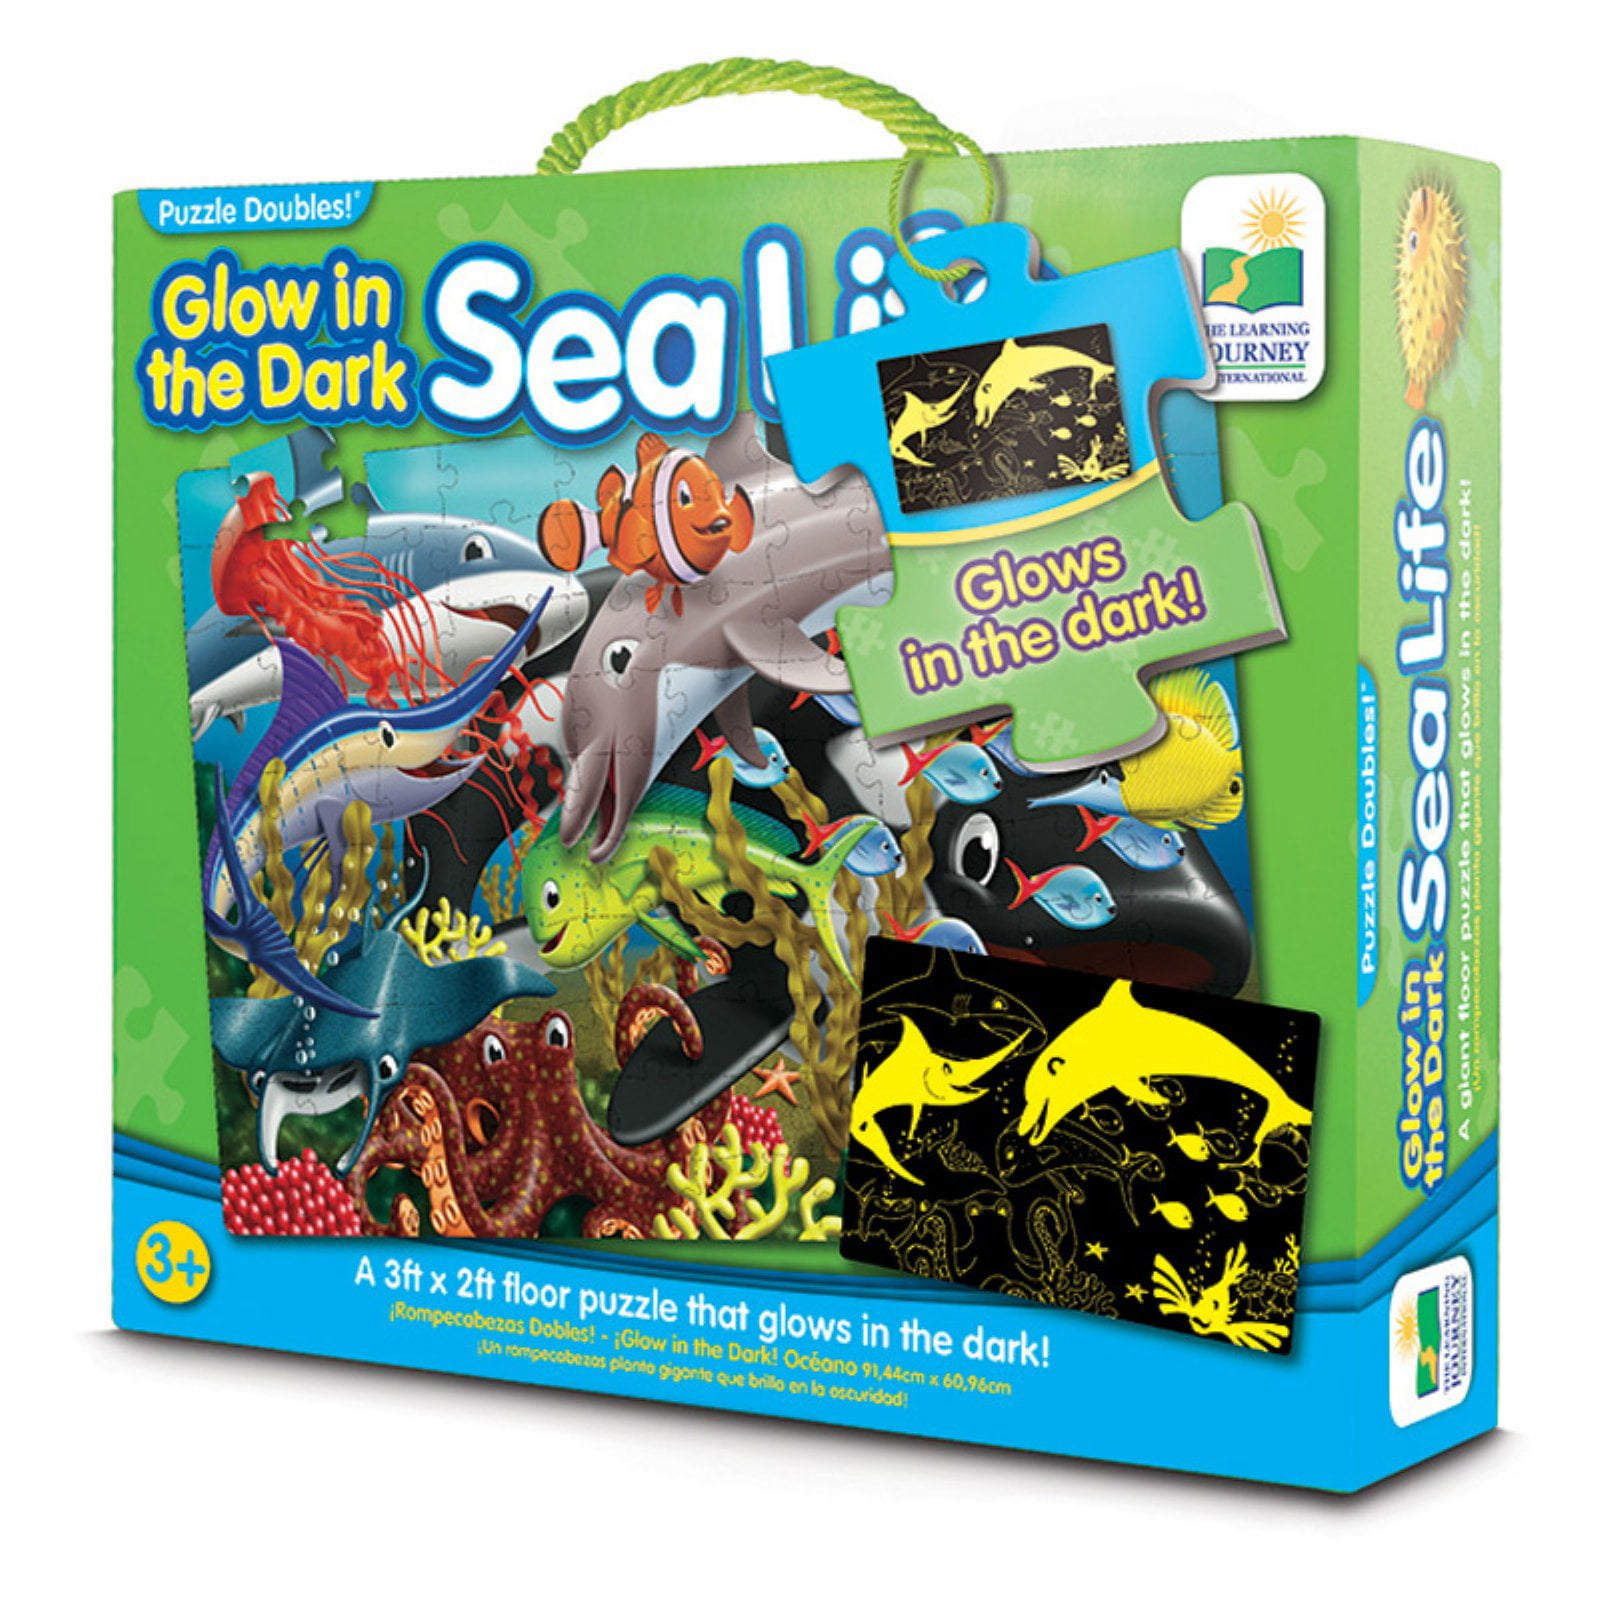 Дарк пазл. How to make a Beachy Sealife Puzzle.